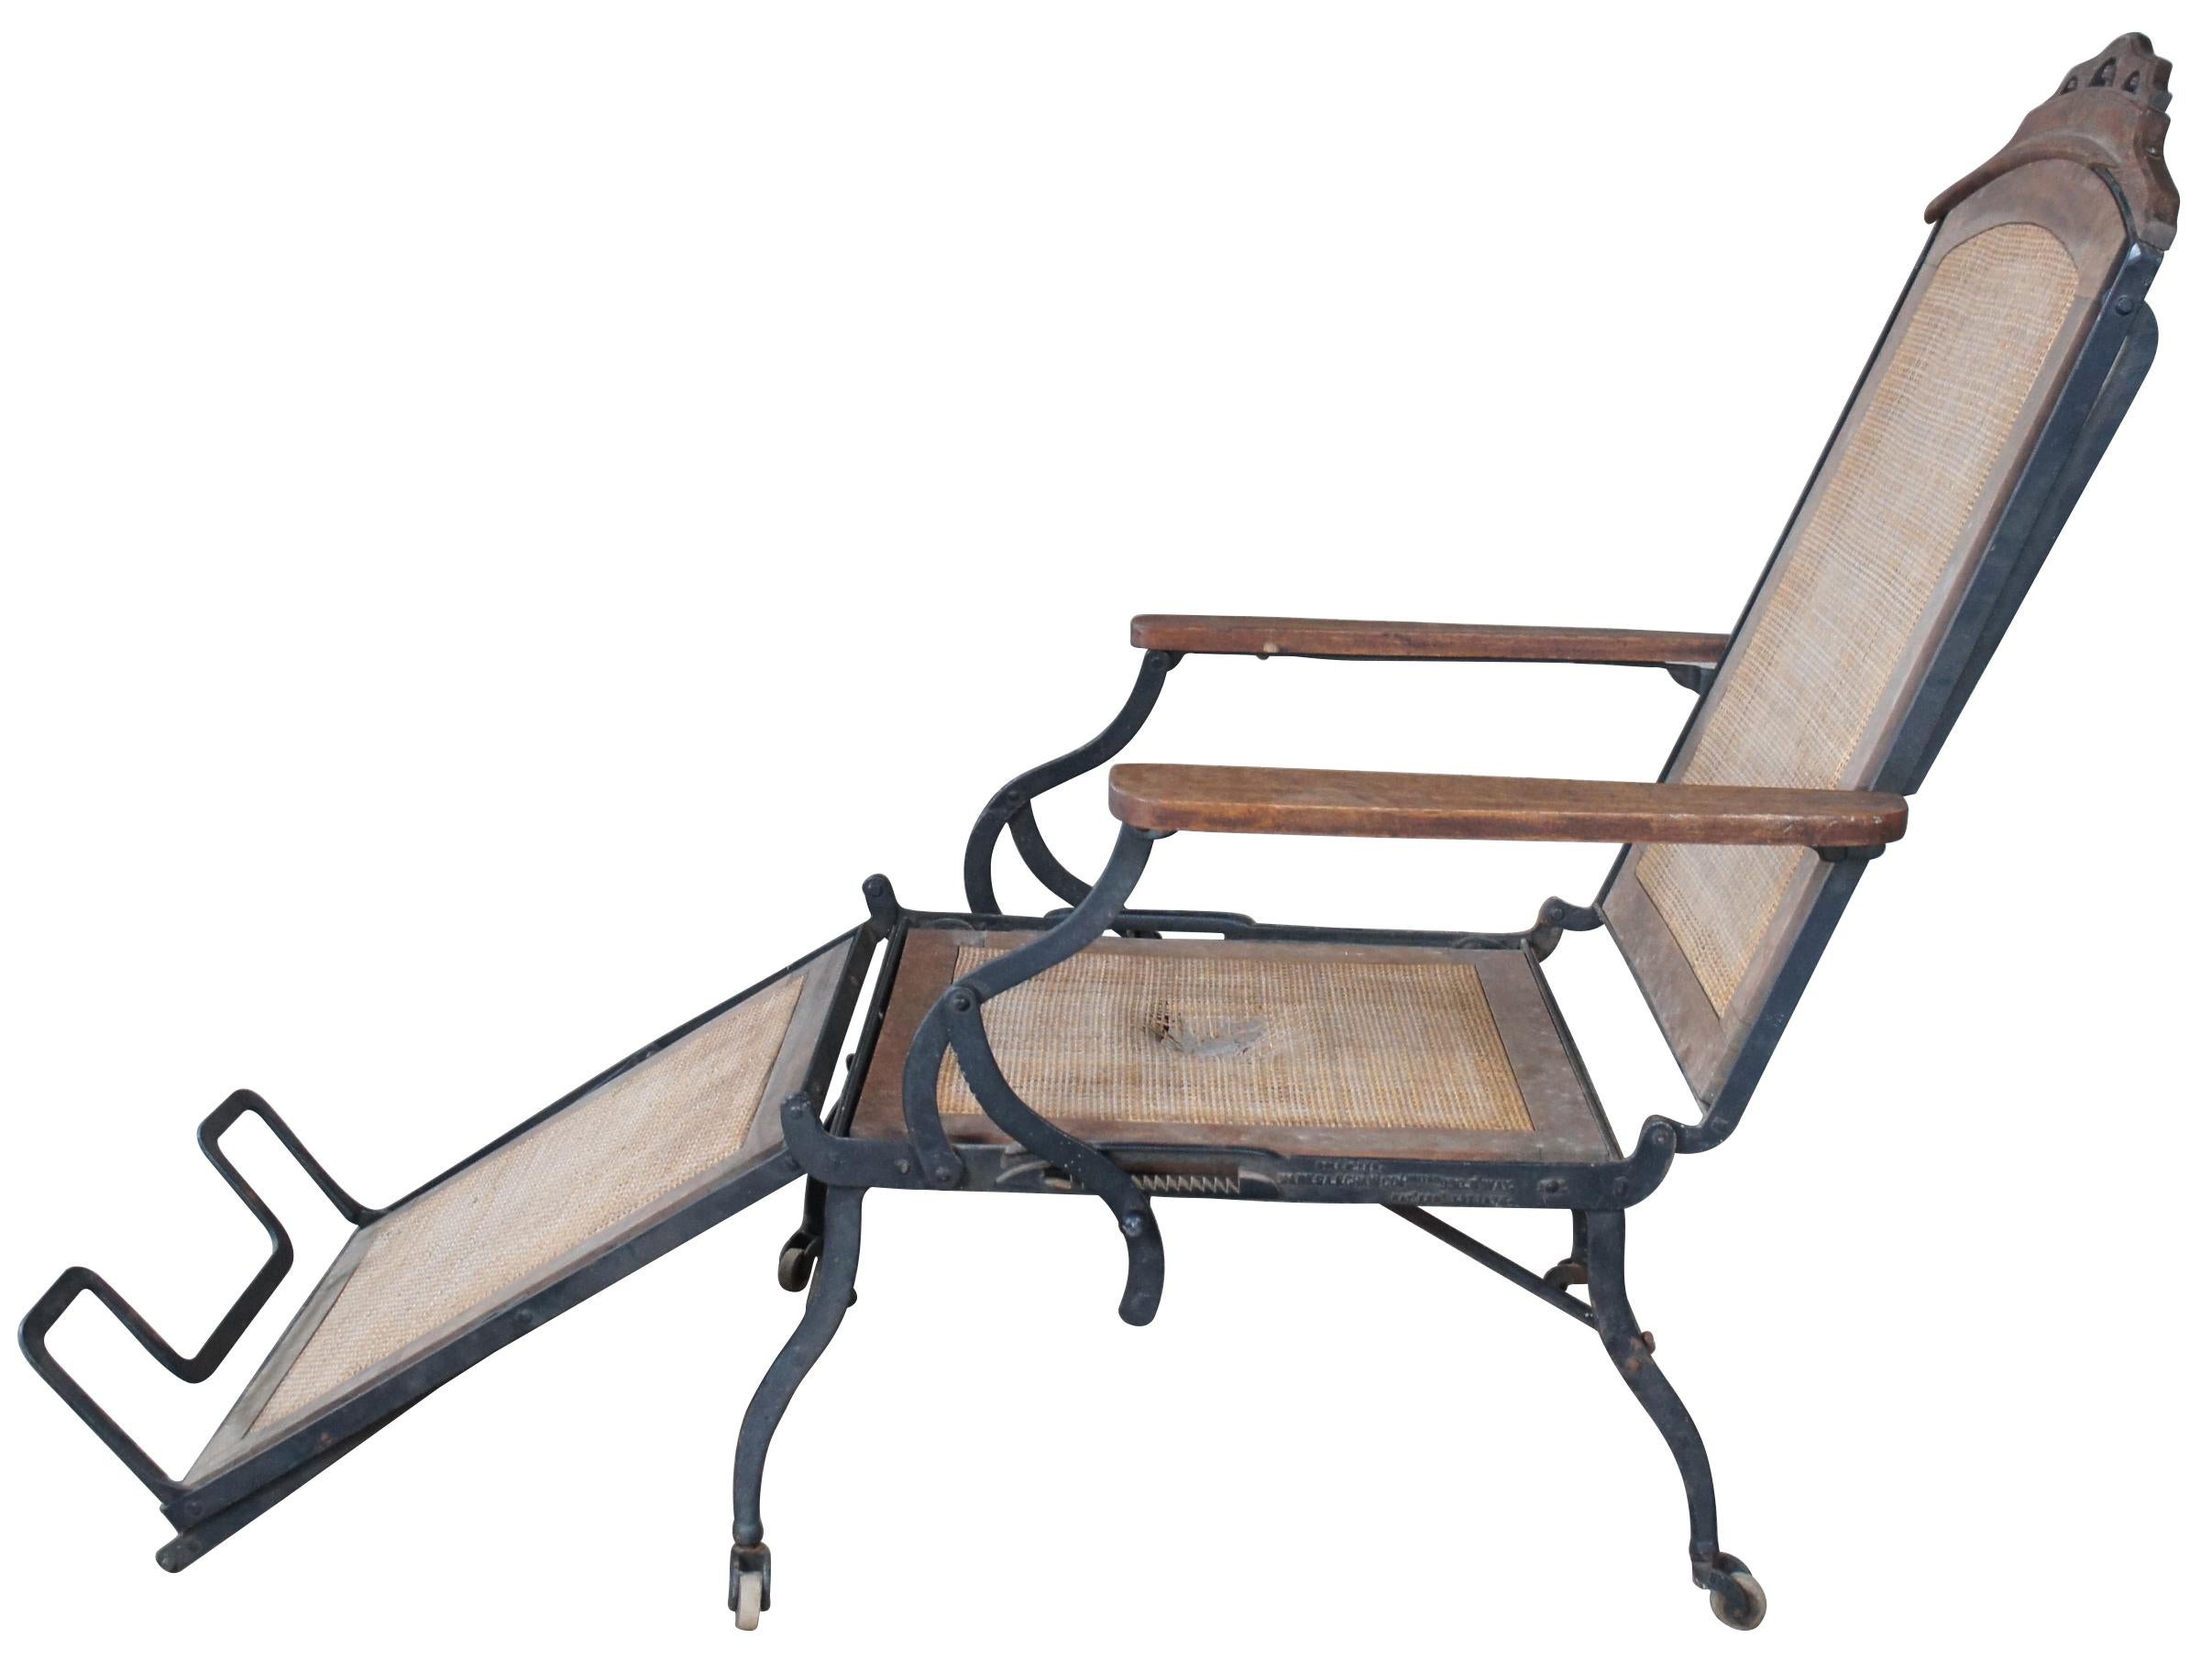 Marks Adjustable Folding Chair Company, campaign folding arm or lounge chair, circa 1877-97.  Made in New York from walnut and iron.  

folded close 28